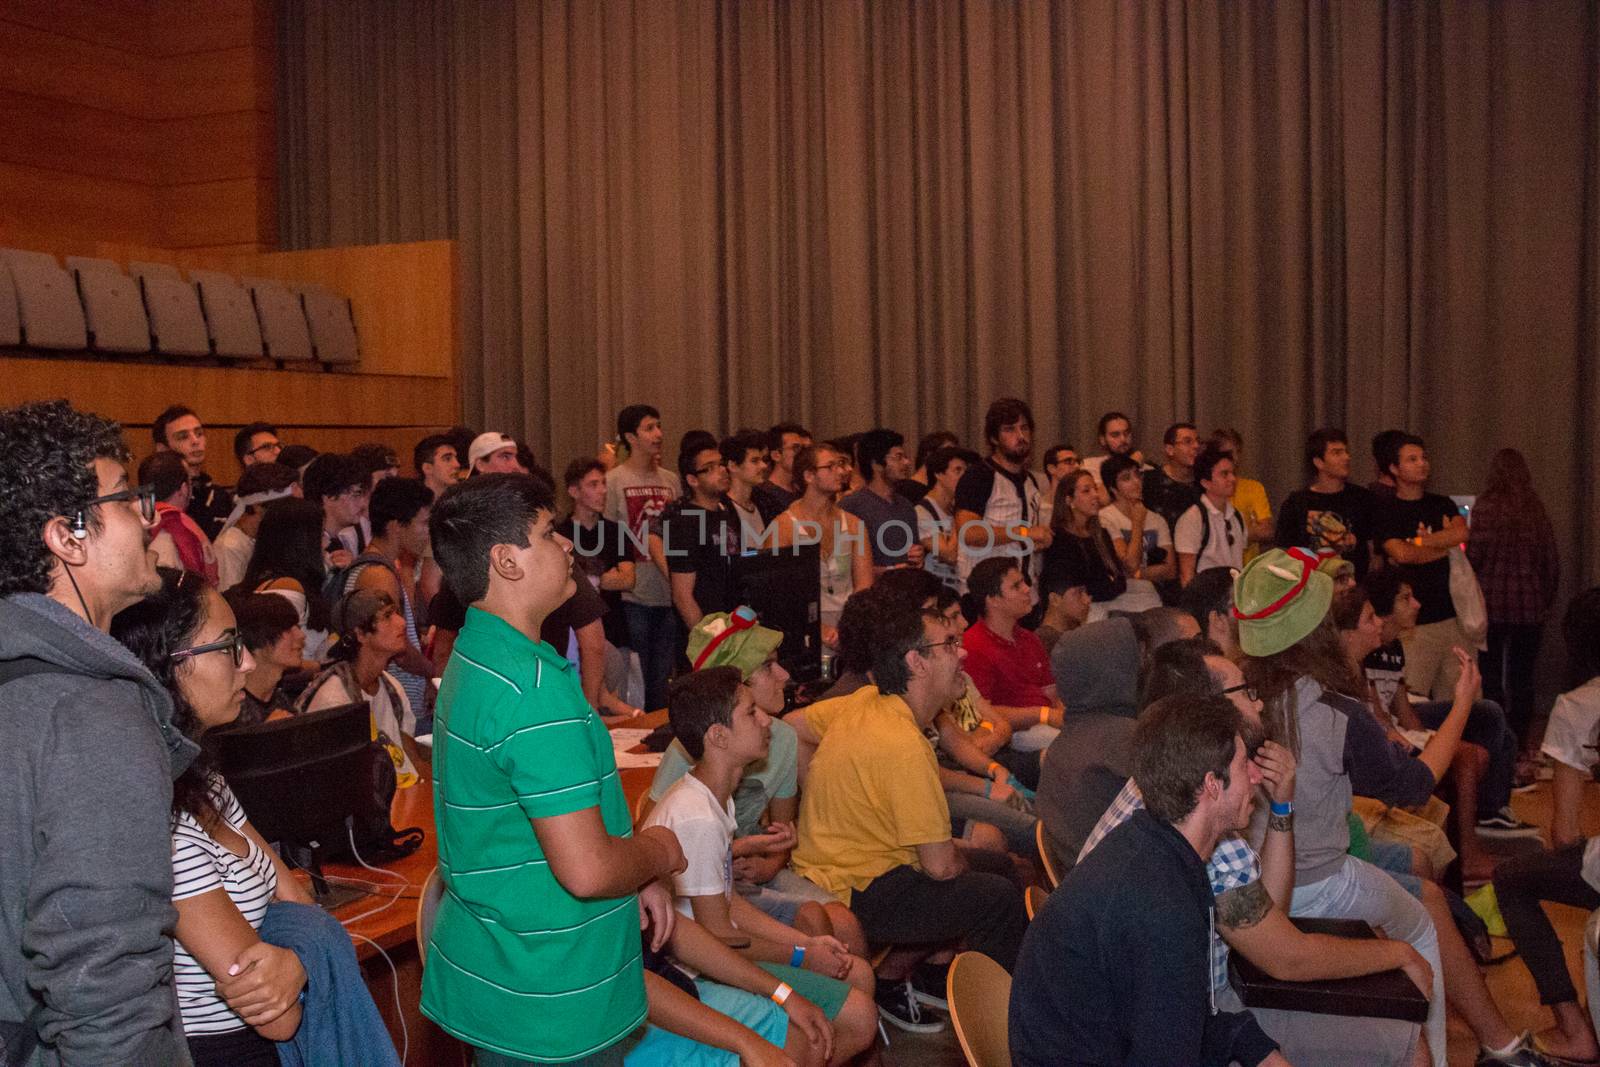 FARO, PORTUGAL - August 22: Manga & Comic Event, gathers many fans of these genres, including anime shows, cosplayers, gamers, concerts, board games, workshops and contests, among several other stuff held on Faro city, Portugal on August 22nd and 23rd, 2015.